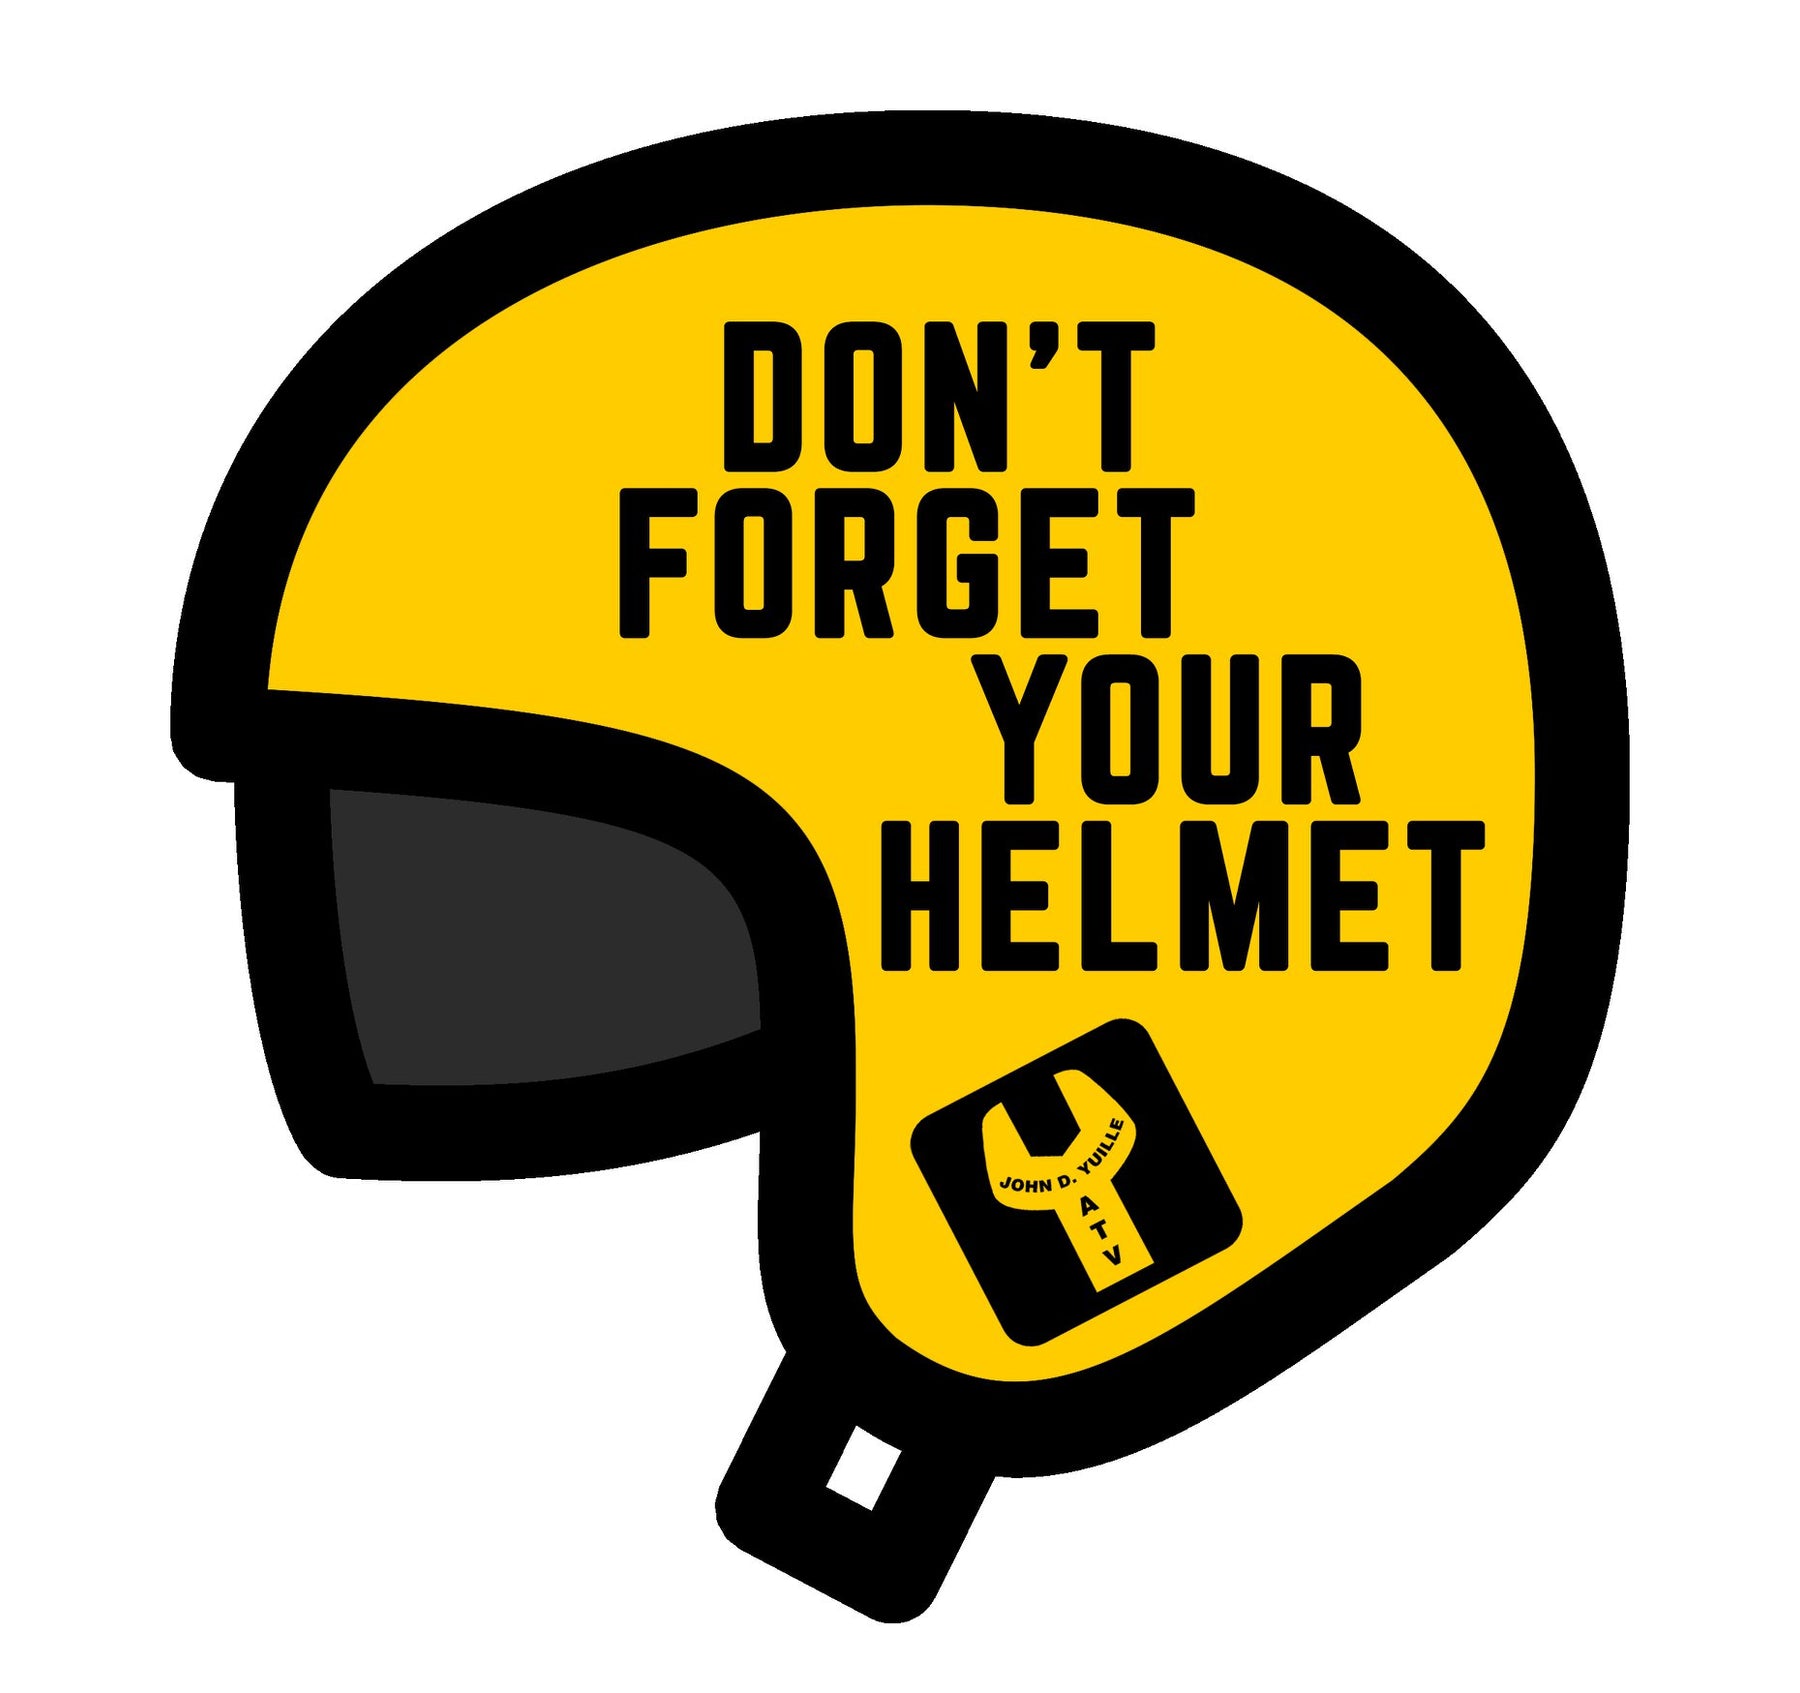 A helmet is to cover your head, not your backside!